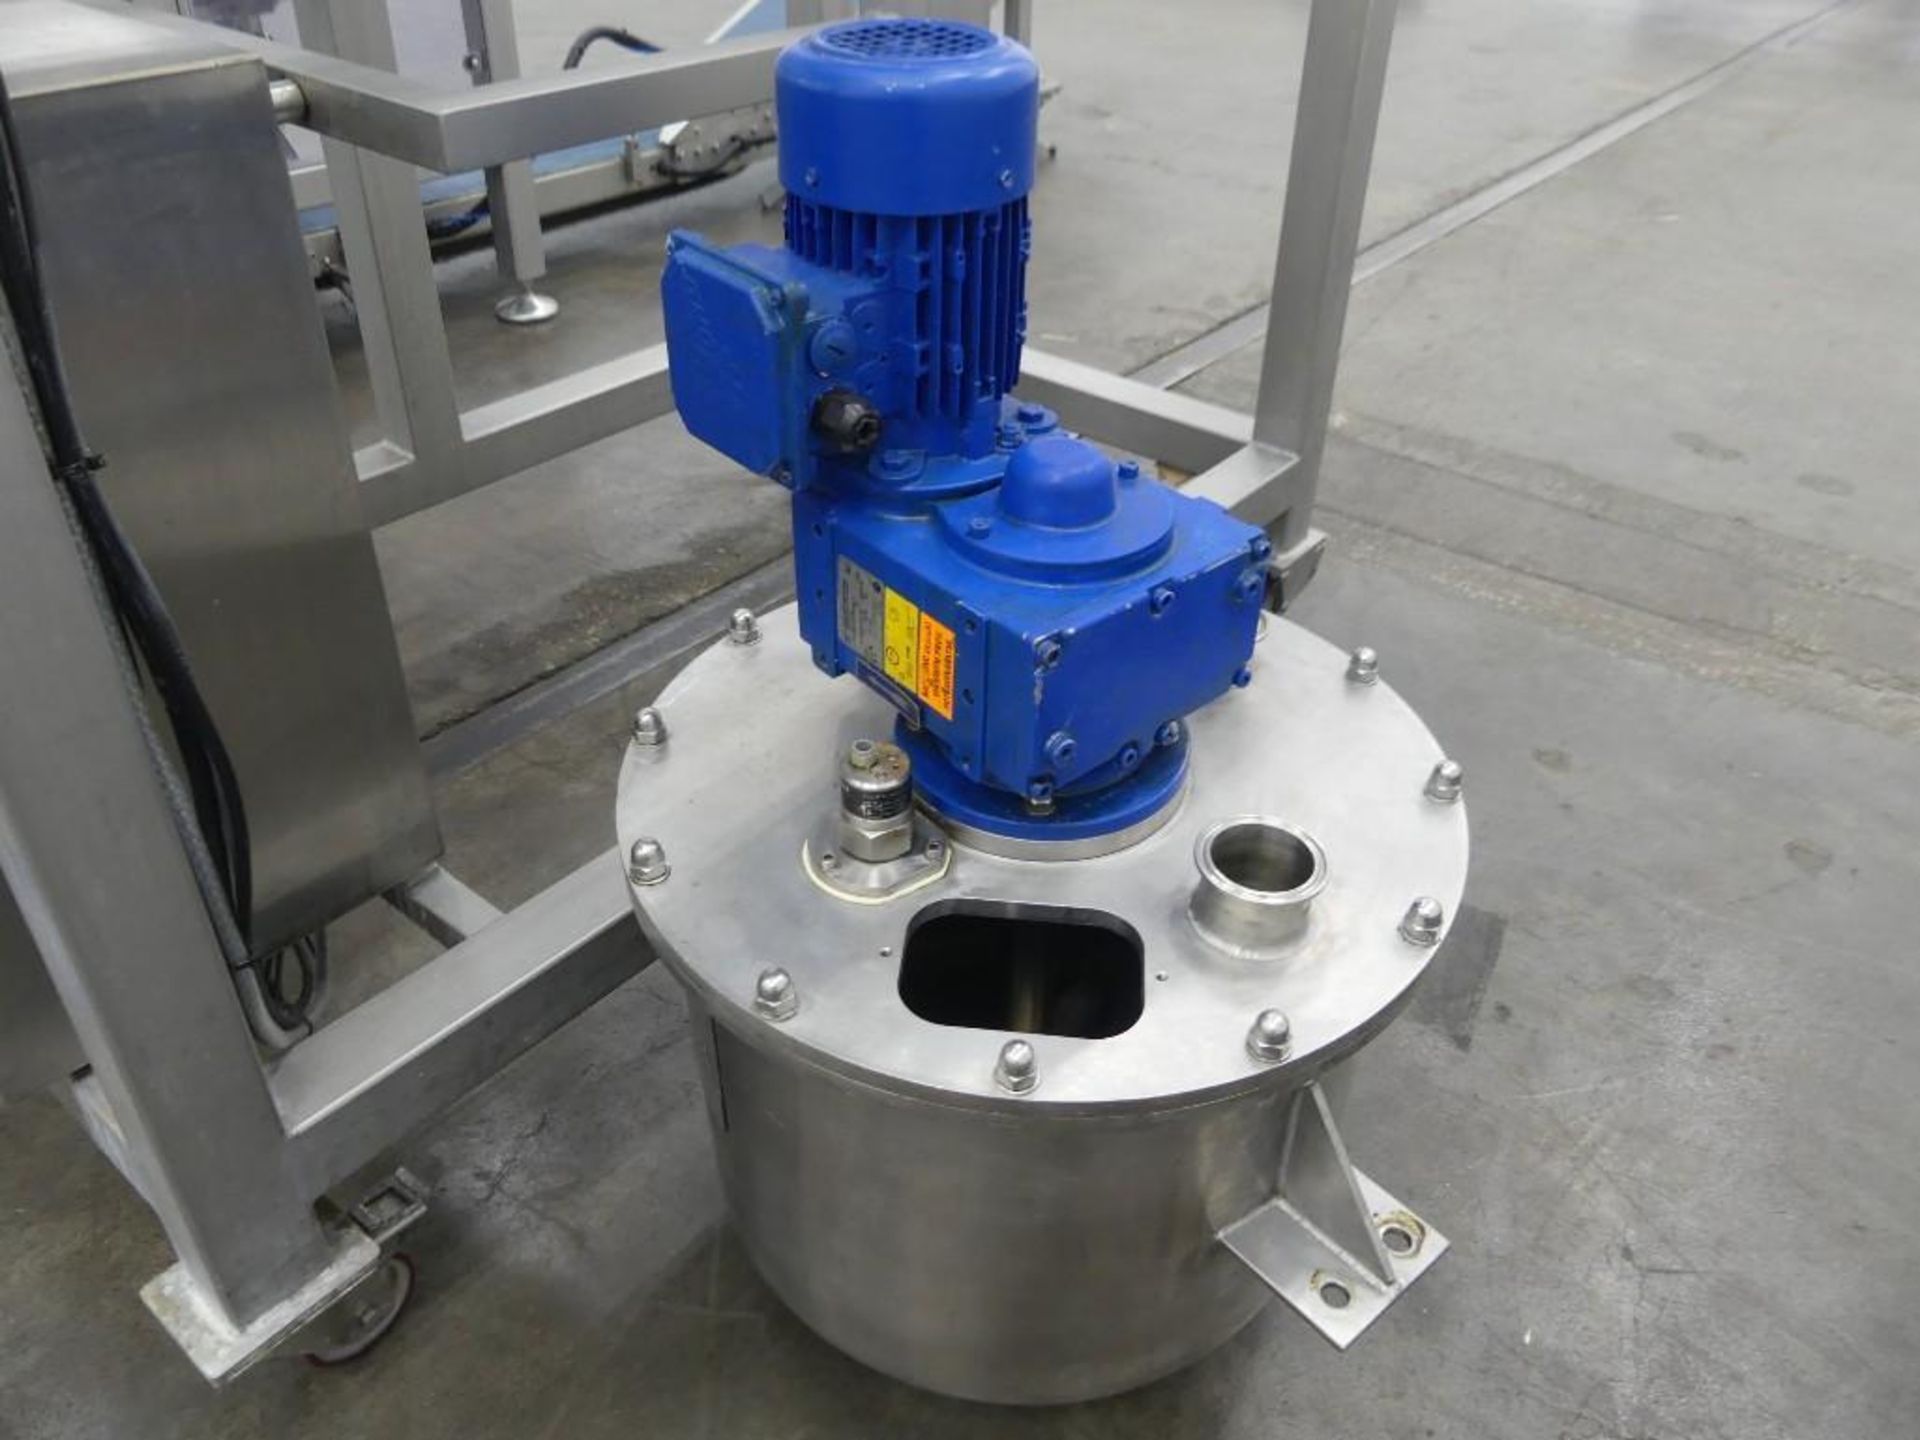 Triapex HV Stainless Steel Vertical Form Fill and Seal with Liquid Filler and Vacuum Pump - Image 26 of 36